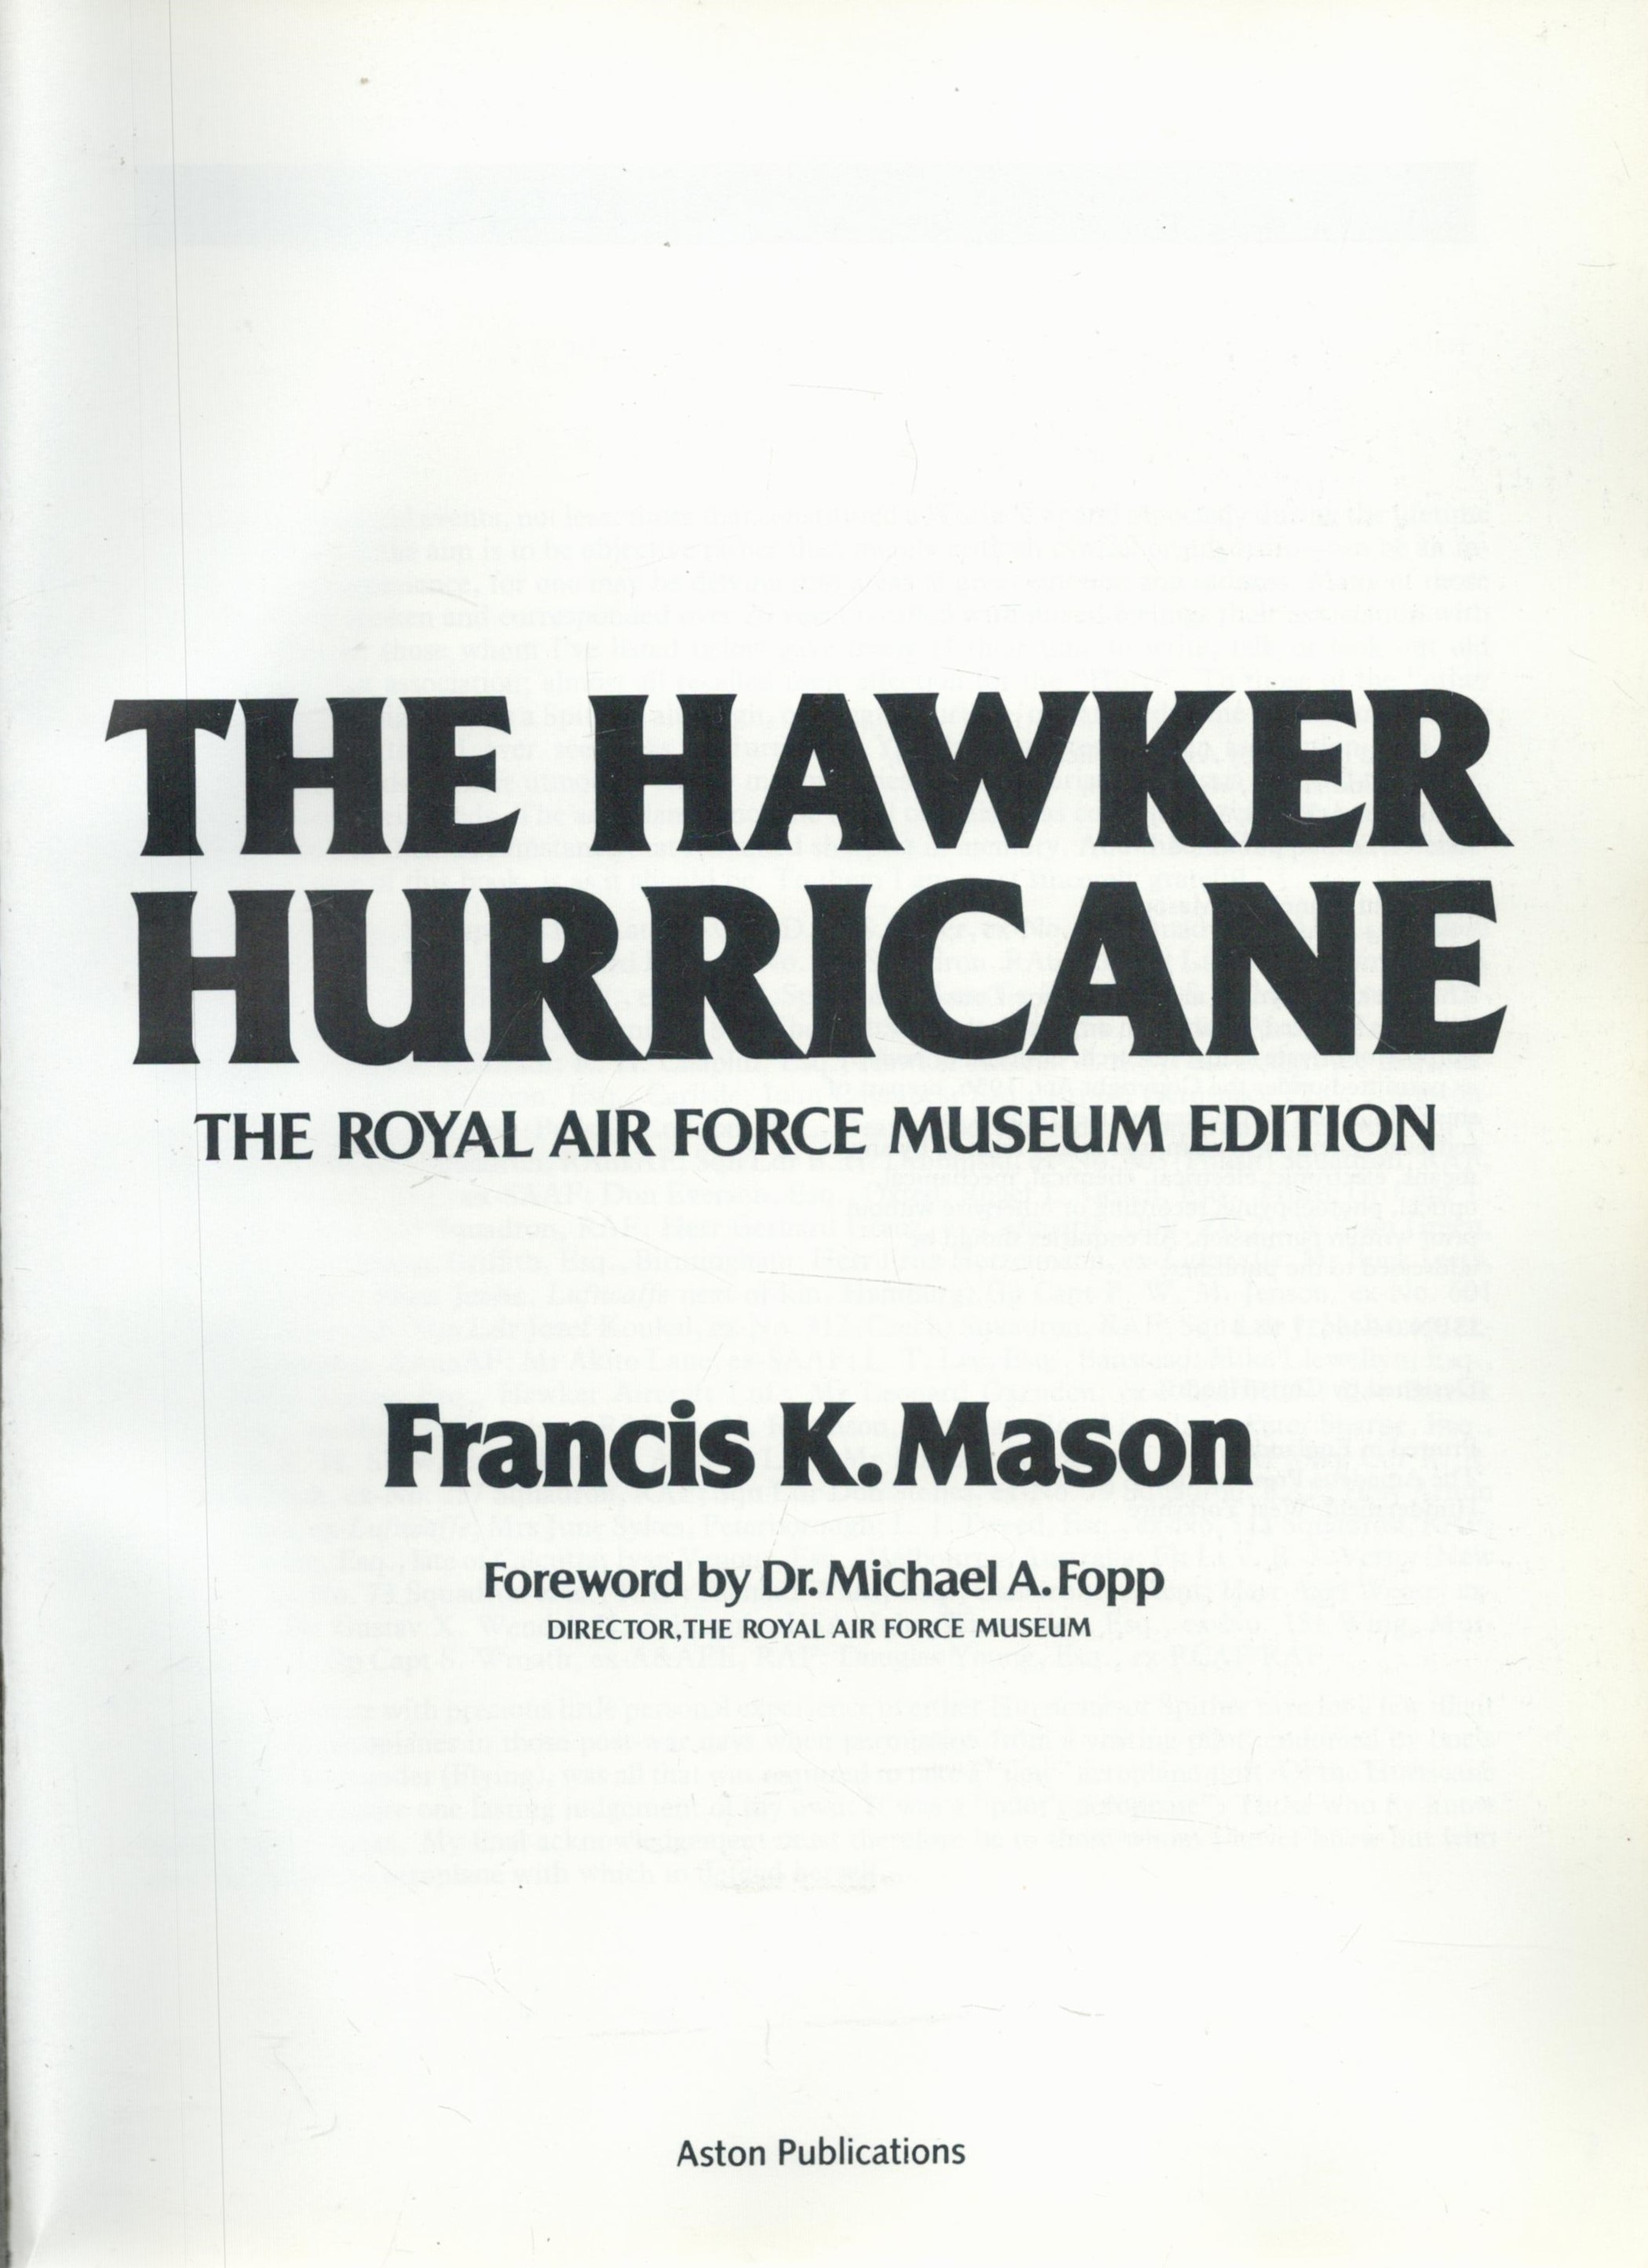 9 WW2 RAF Pilots Signed Hardback Book Titled The Hawker Hurricane By Francis K Mason. Signed on - Image 3 of 4